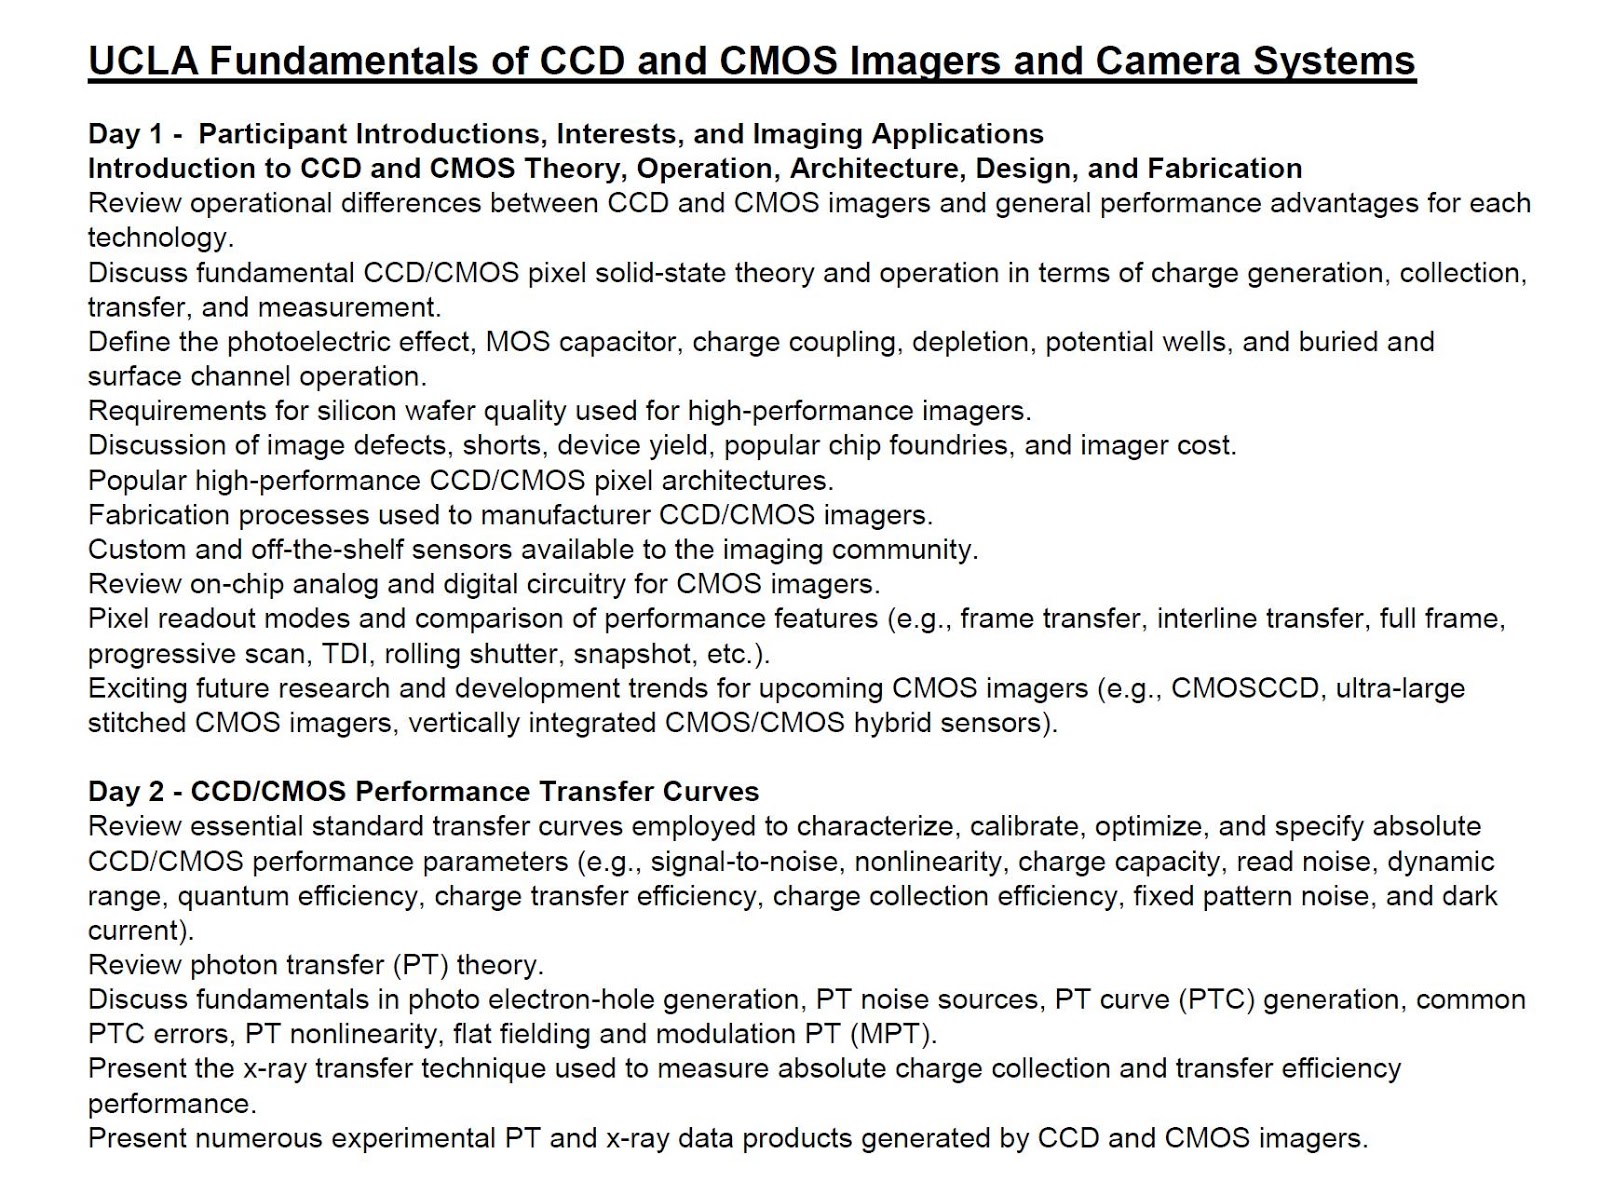 james Janesick UCLA CCD and CMOS imagers course content